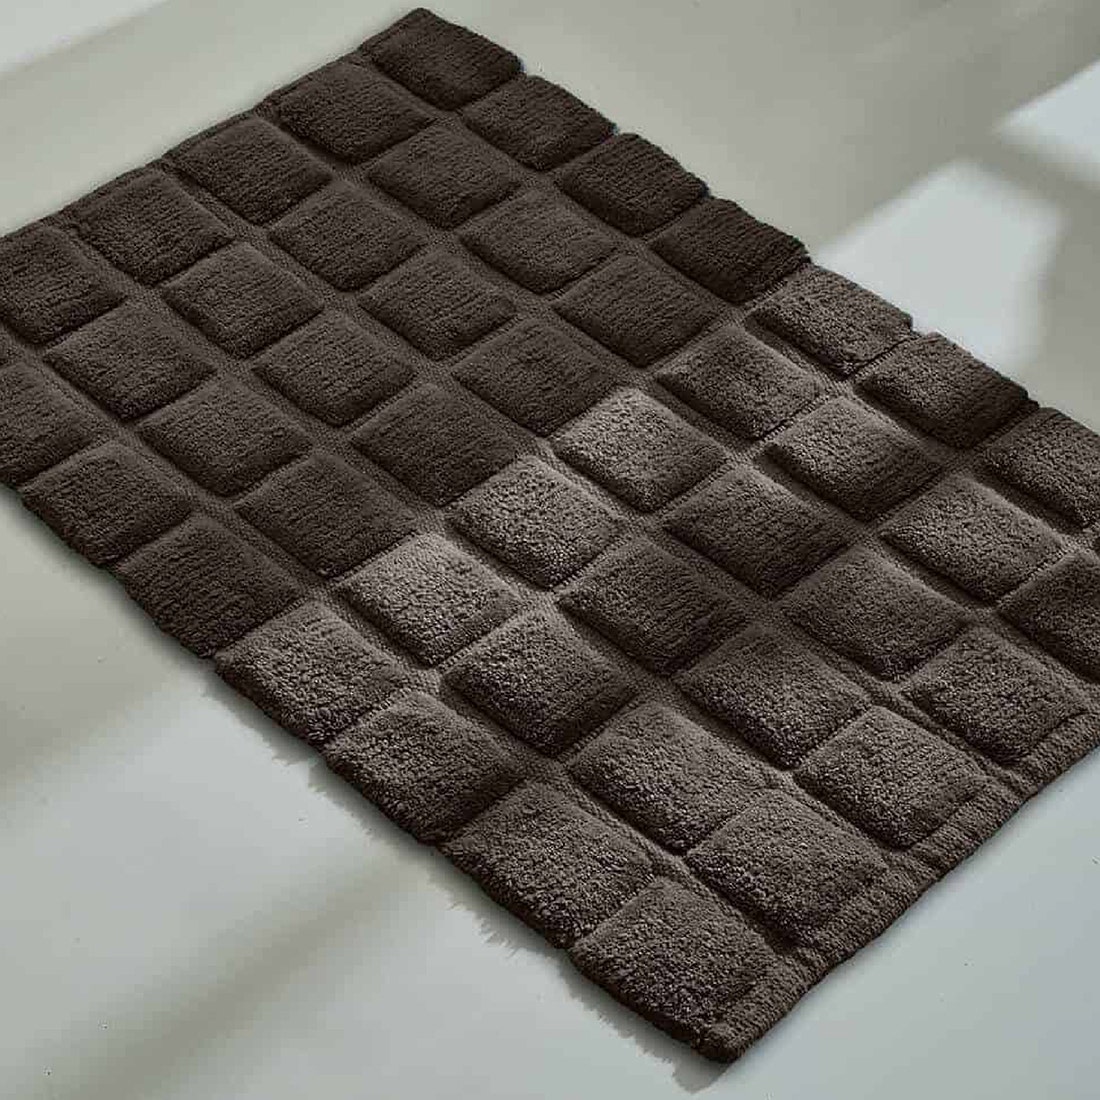 39013426-home-decor-rugs-mats-decorative-rugs-31